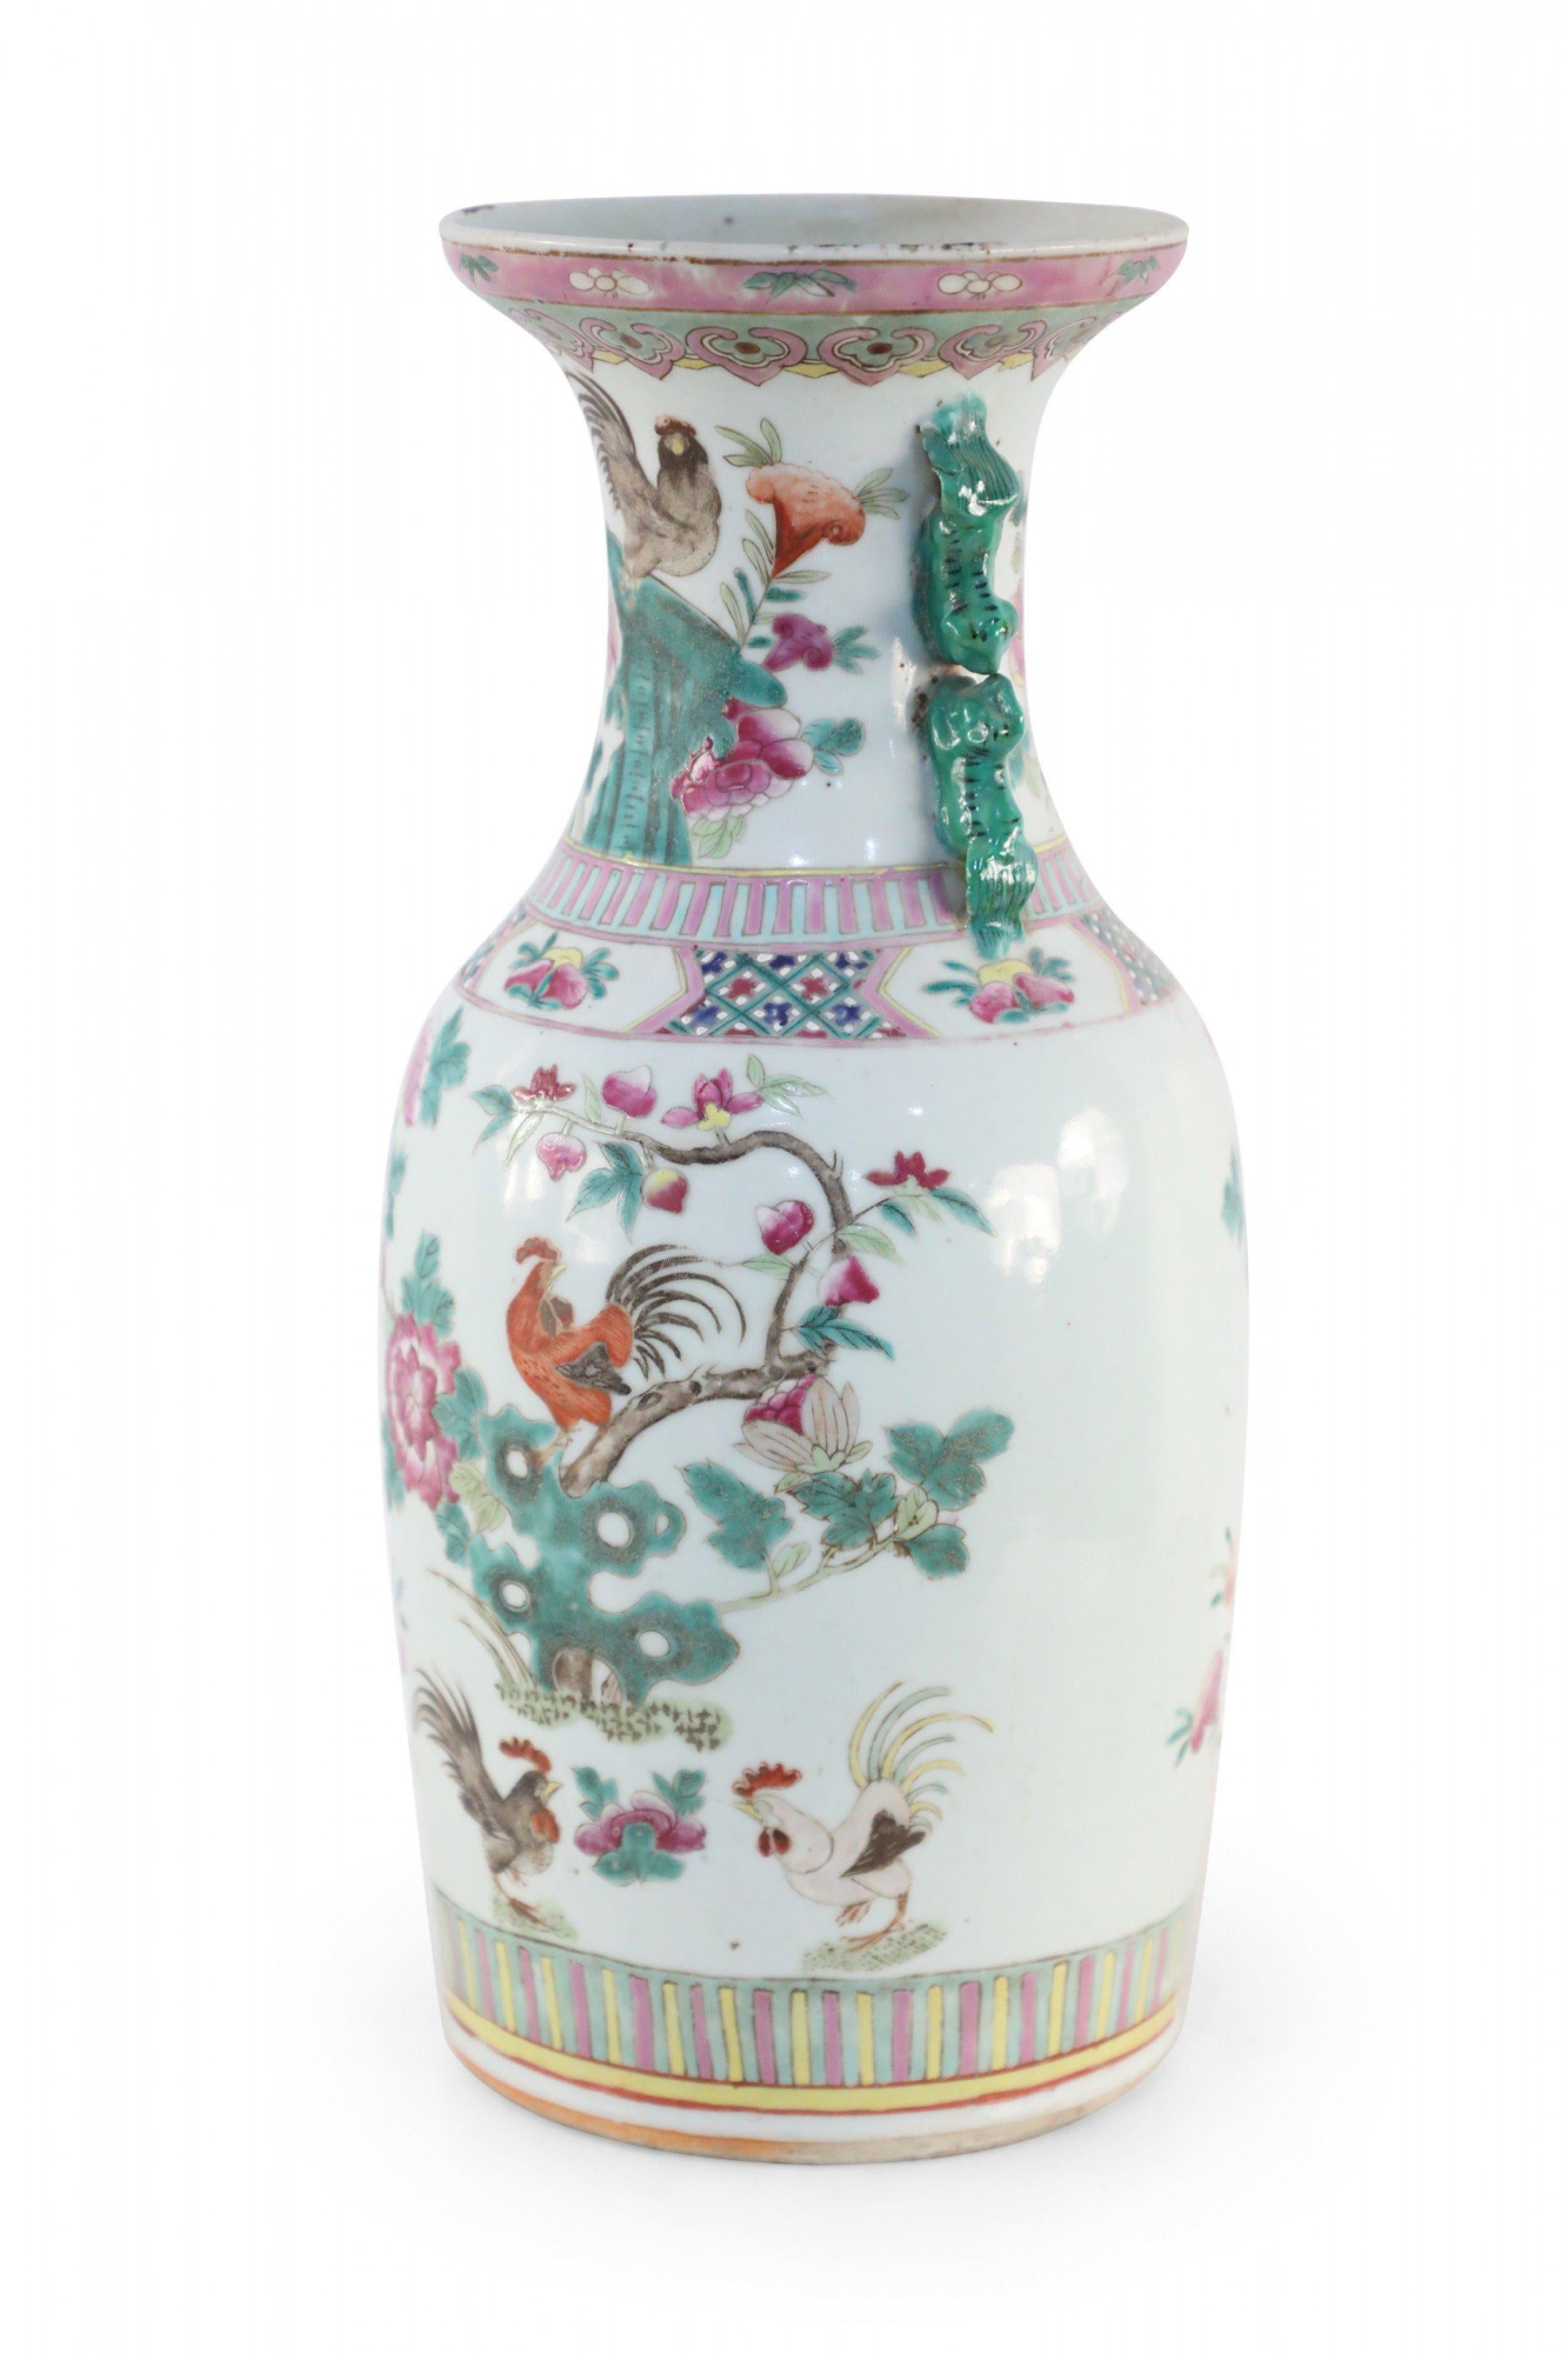 Chinese White, Green, and Pink Floral and Rooster Design Porcelain Urn In Good Condition For Sale In New York, NY